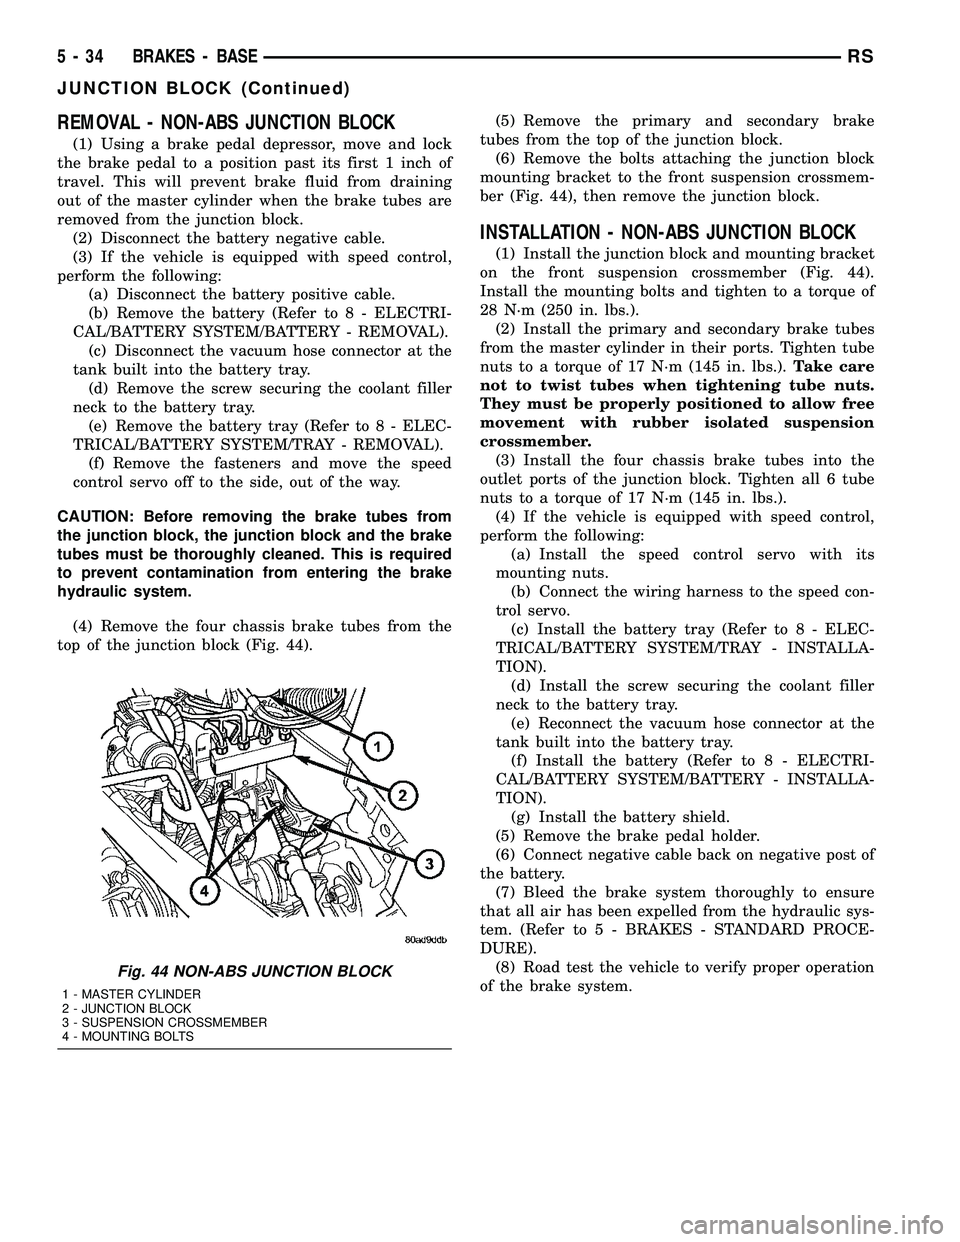 CHRYSLER VOYAGER 2005  Service Manual REMOVAL - NON-ABS JUNCTION BLOCK
(1) Using a brake pedal depressor, move and lock
the brake pedal to a position past its first 1 inch of
travel. This will prevent brake fluid from draining
out of the 